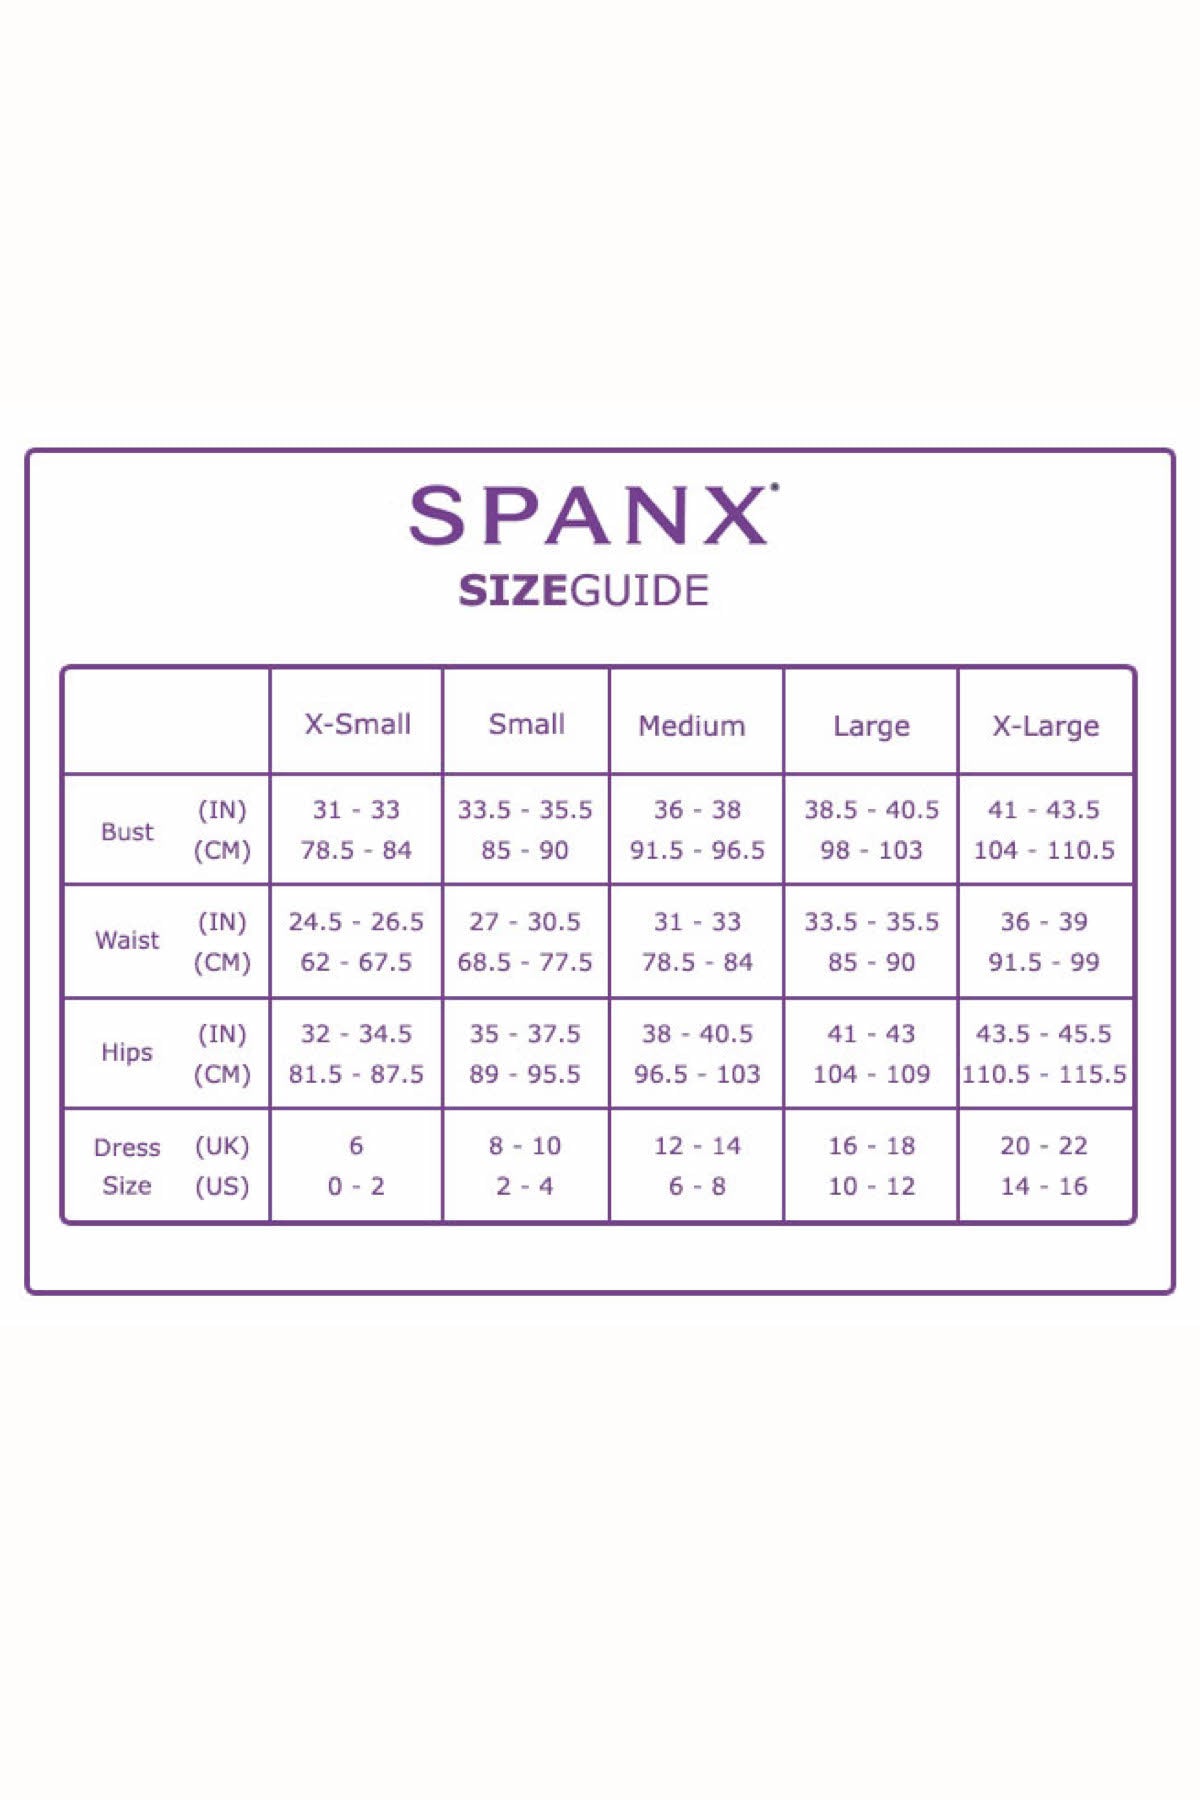 SPANX PLUS Nude High-Waisted Super-Slimming Shaper